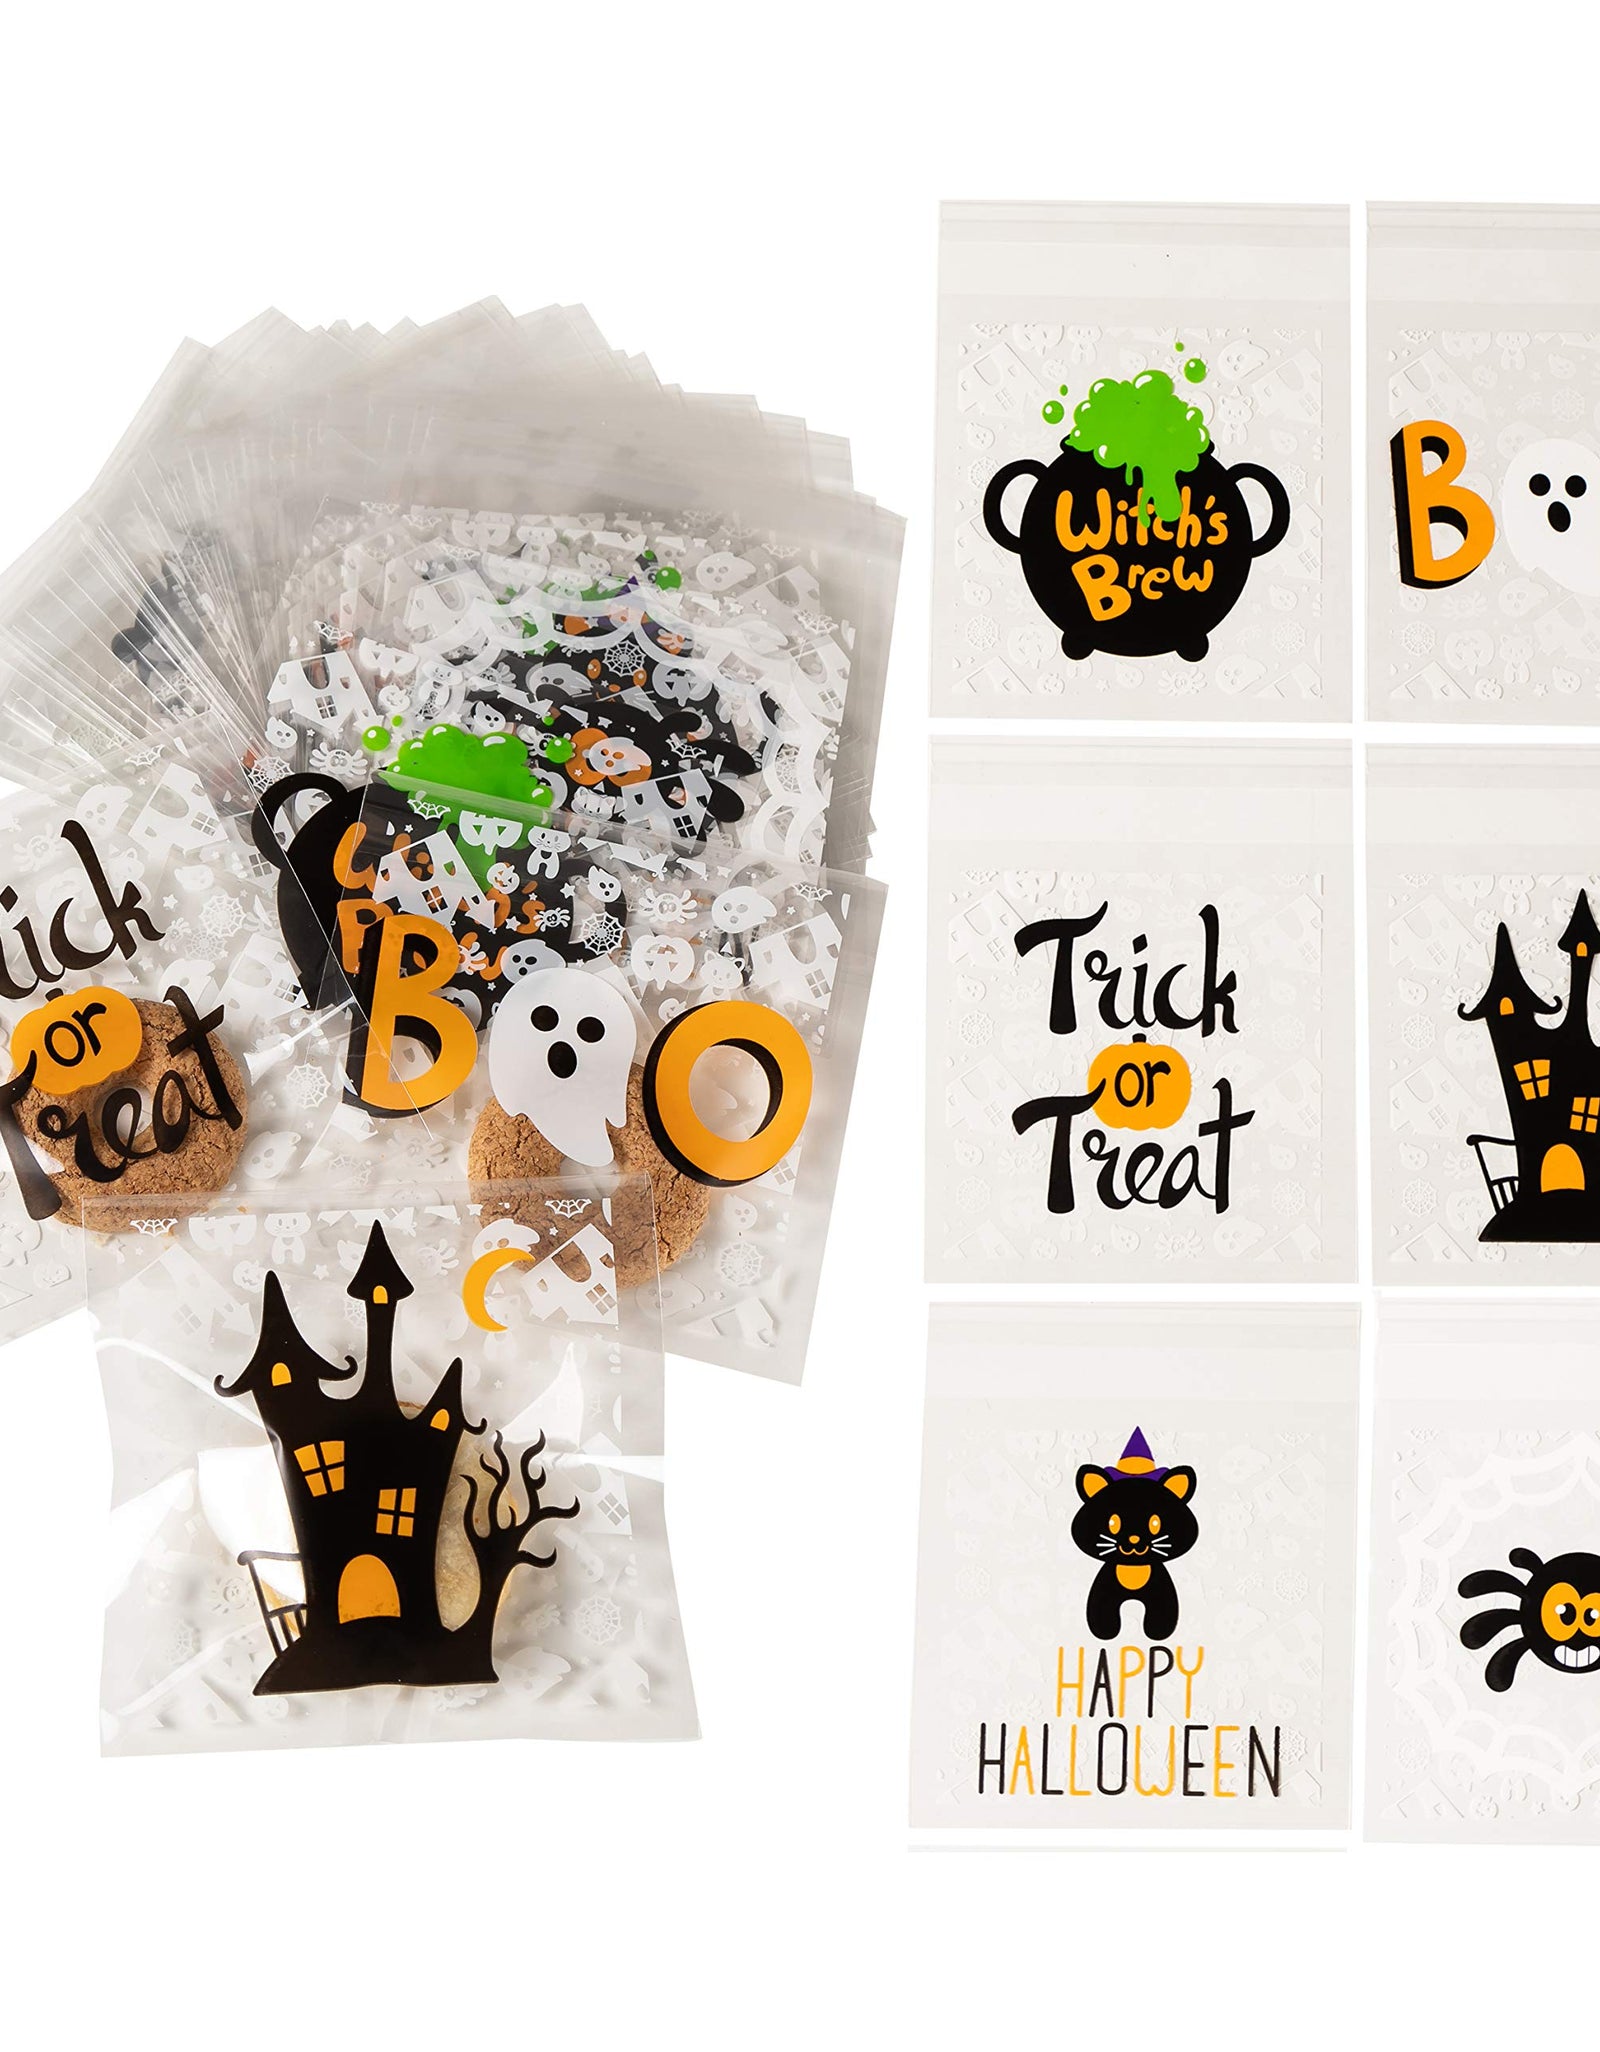 JOYIN 150 PCS Halloween Cellophane Treat Bags Self Adhesive Clear Cookie and Candy Bags for Halloween Party Favors Supplies